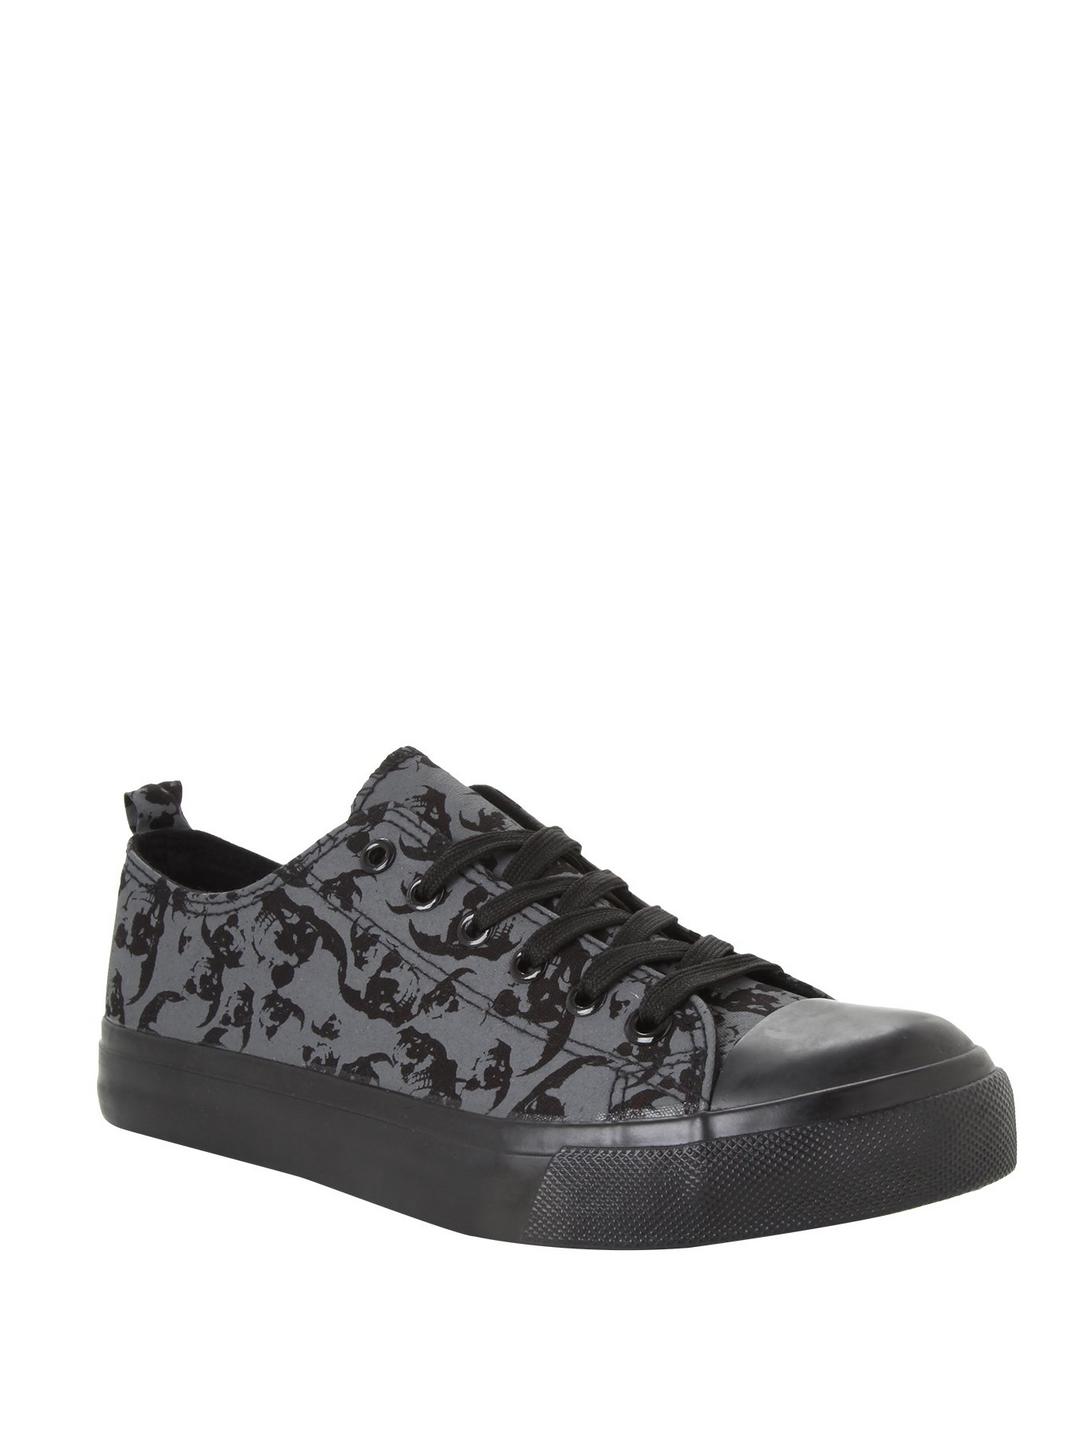 Skull Print Lace-Up Sneakers | Hot Topic